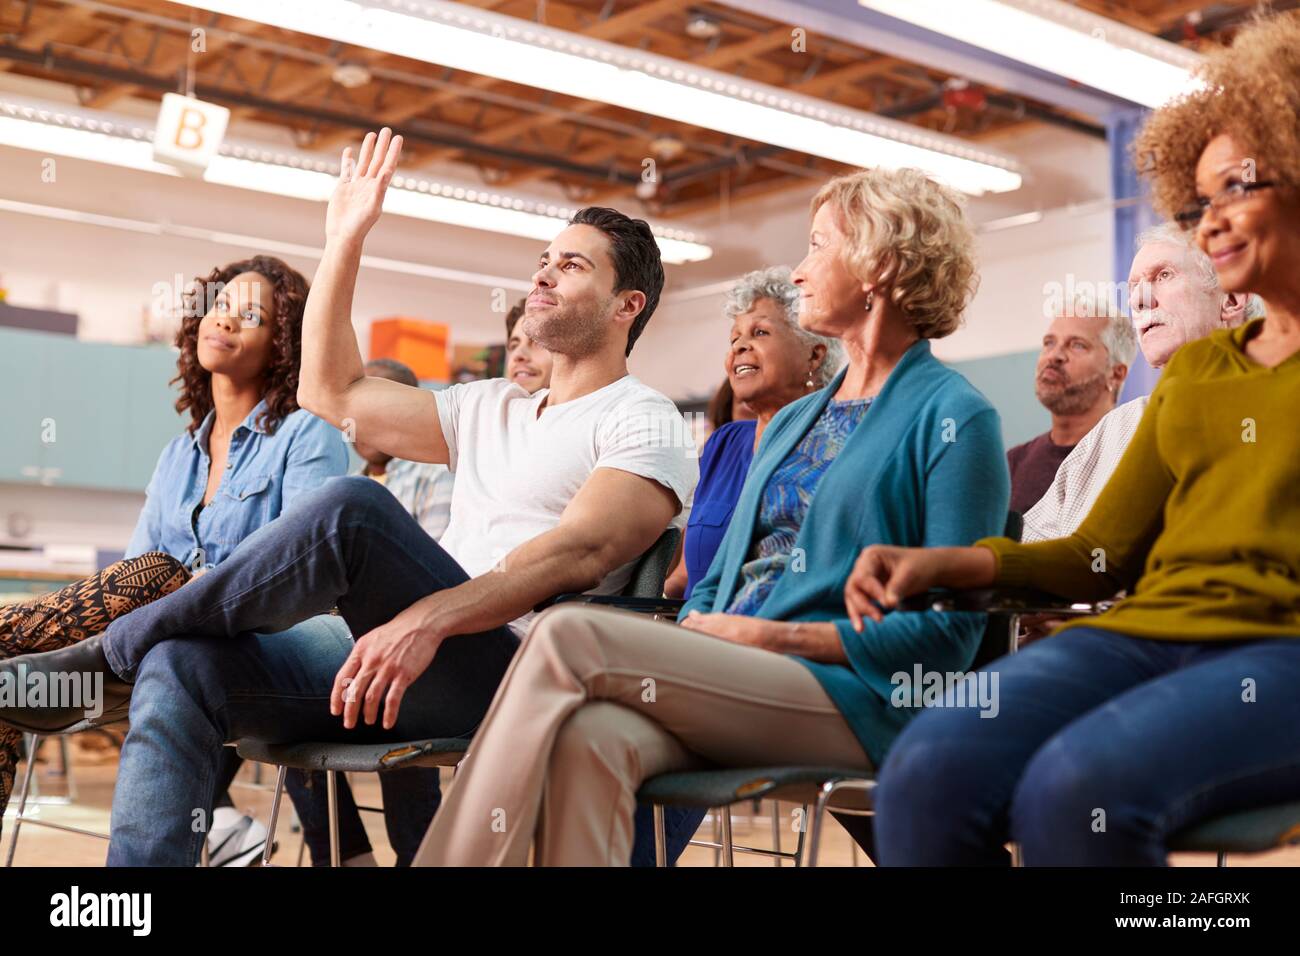 Man Asking Question At Neighborhood Meeting In Community Center Stock Photo